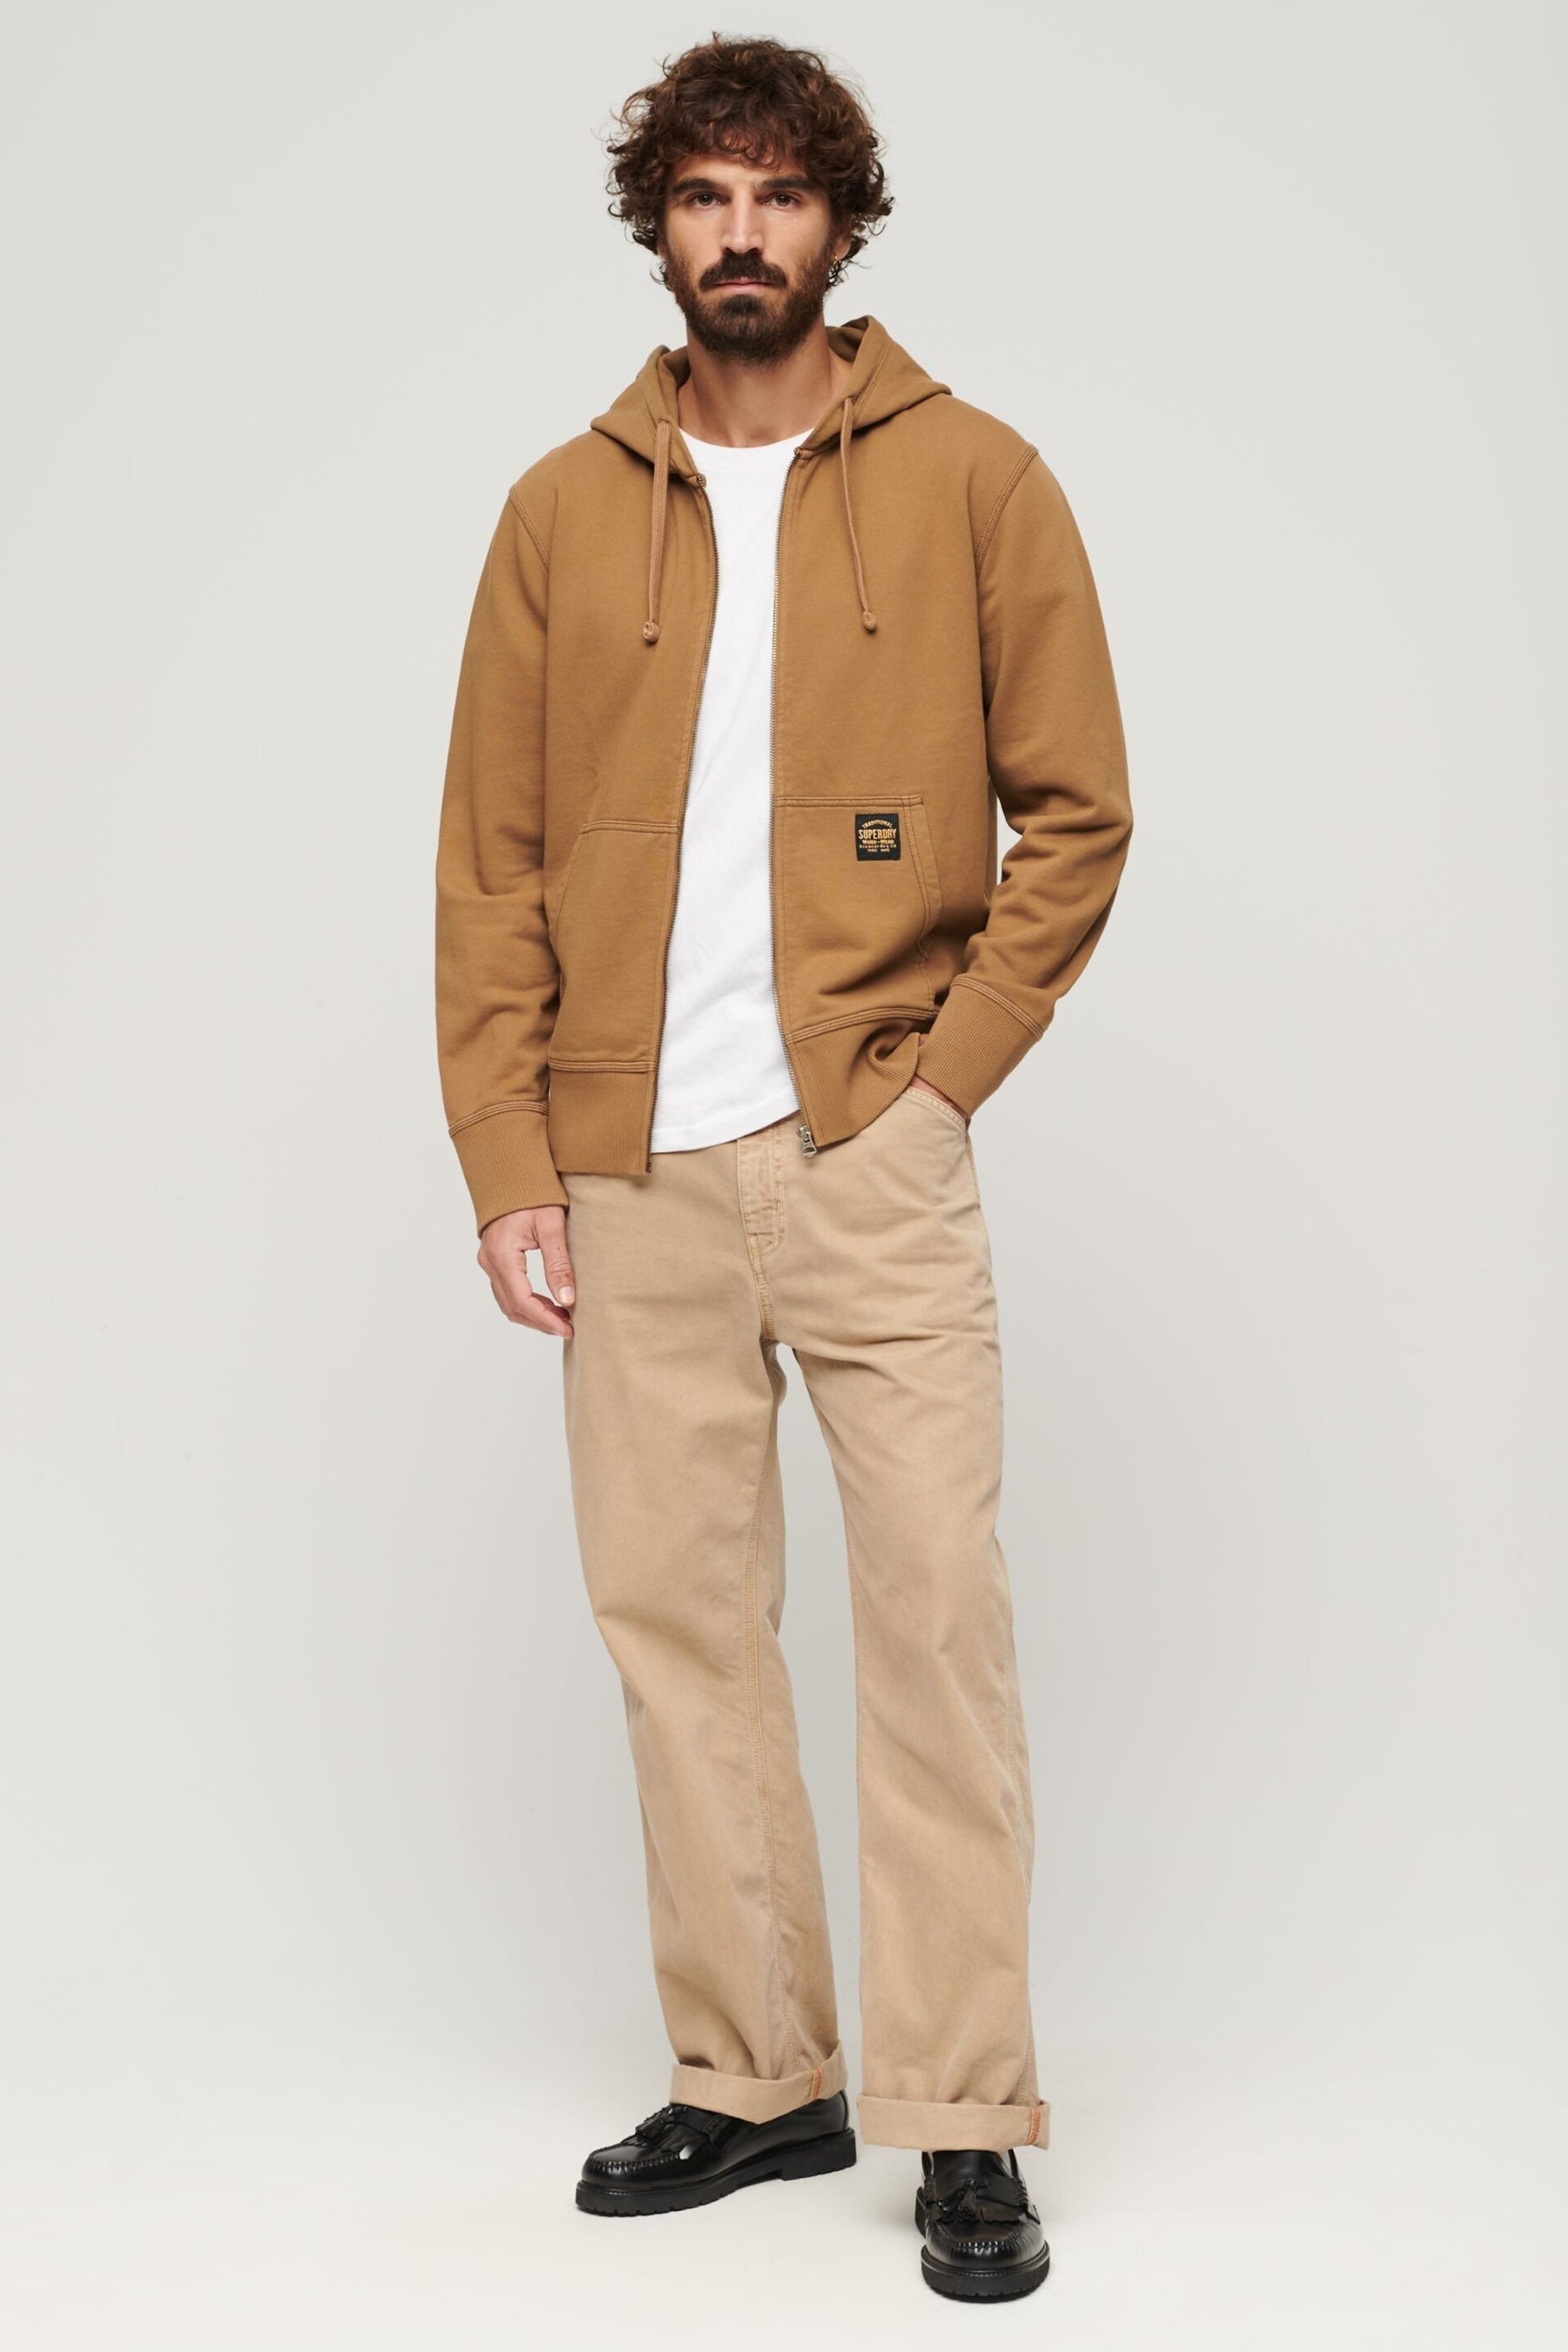 Superdry Brown Contrast Stitch Relax Zip Hoodie - Image 3 of 4